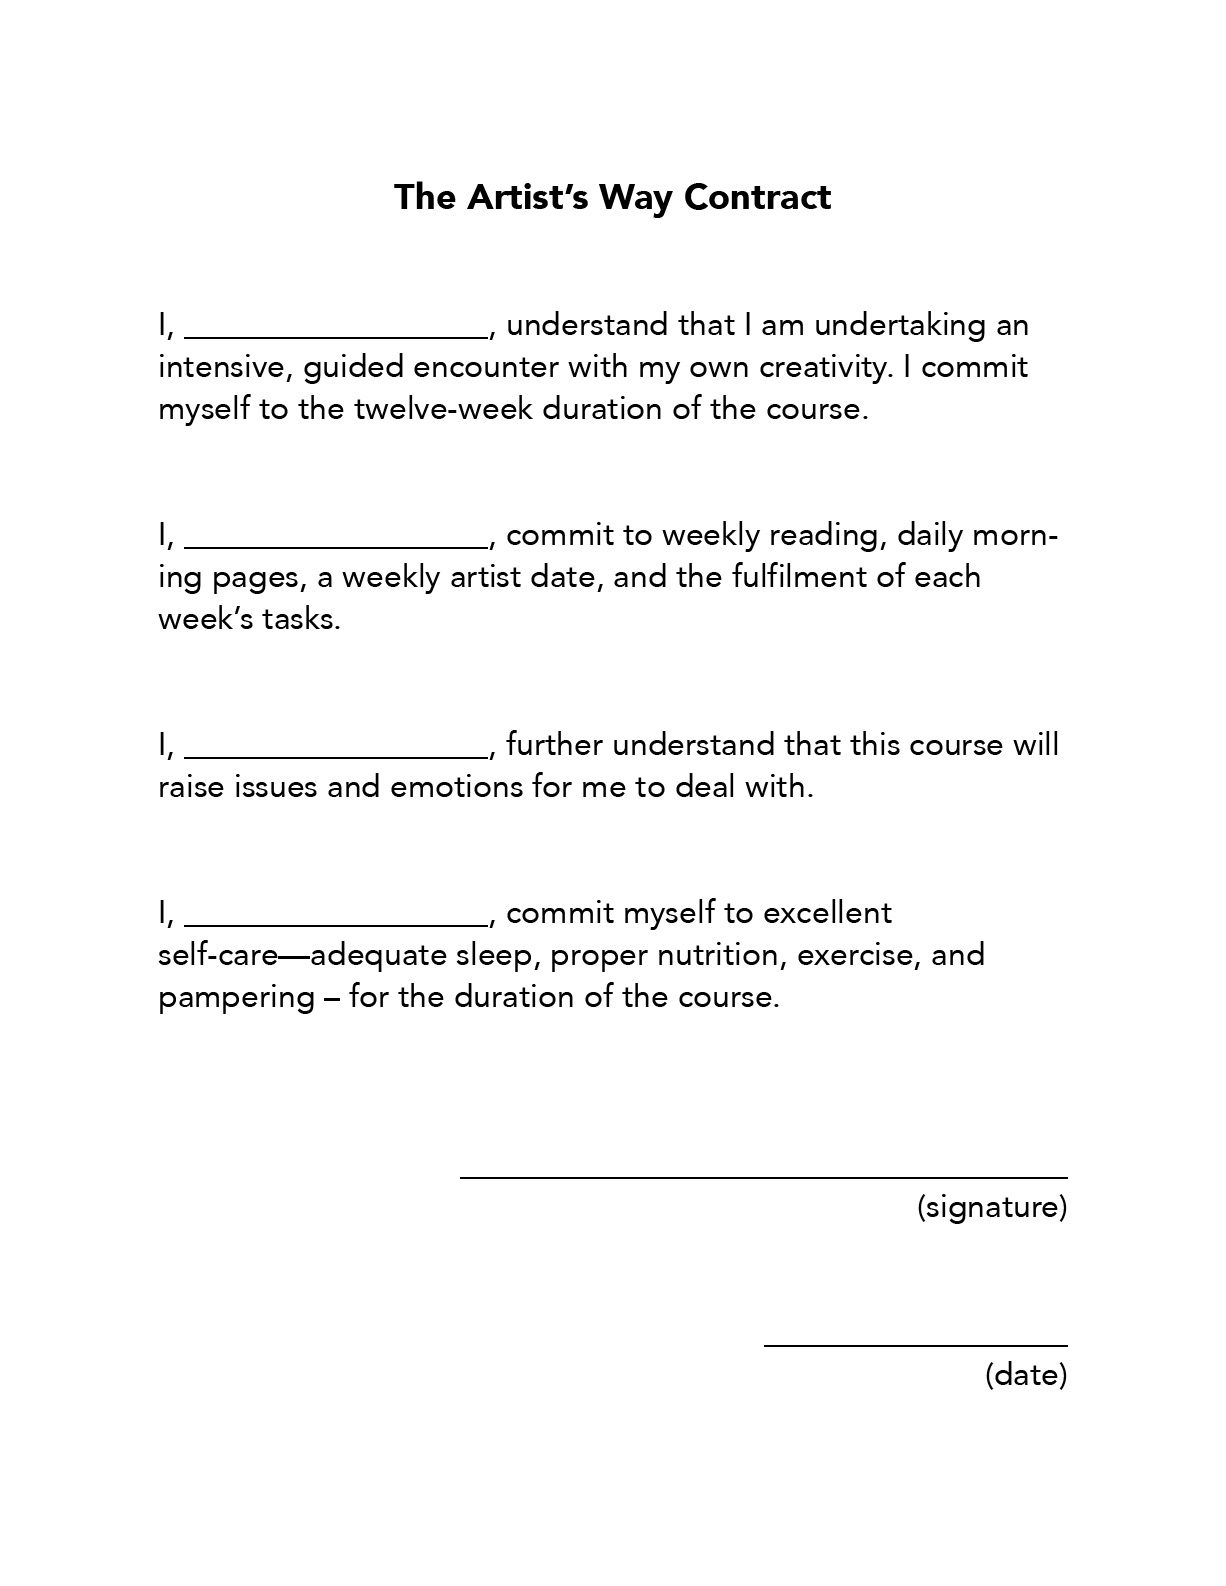 The Artist's Way Contract